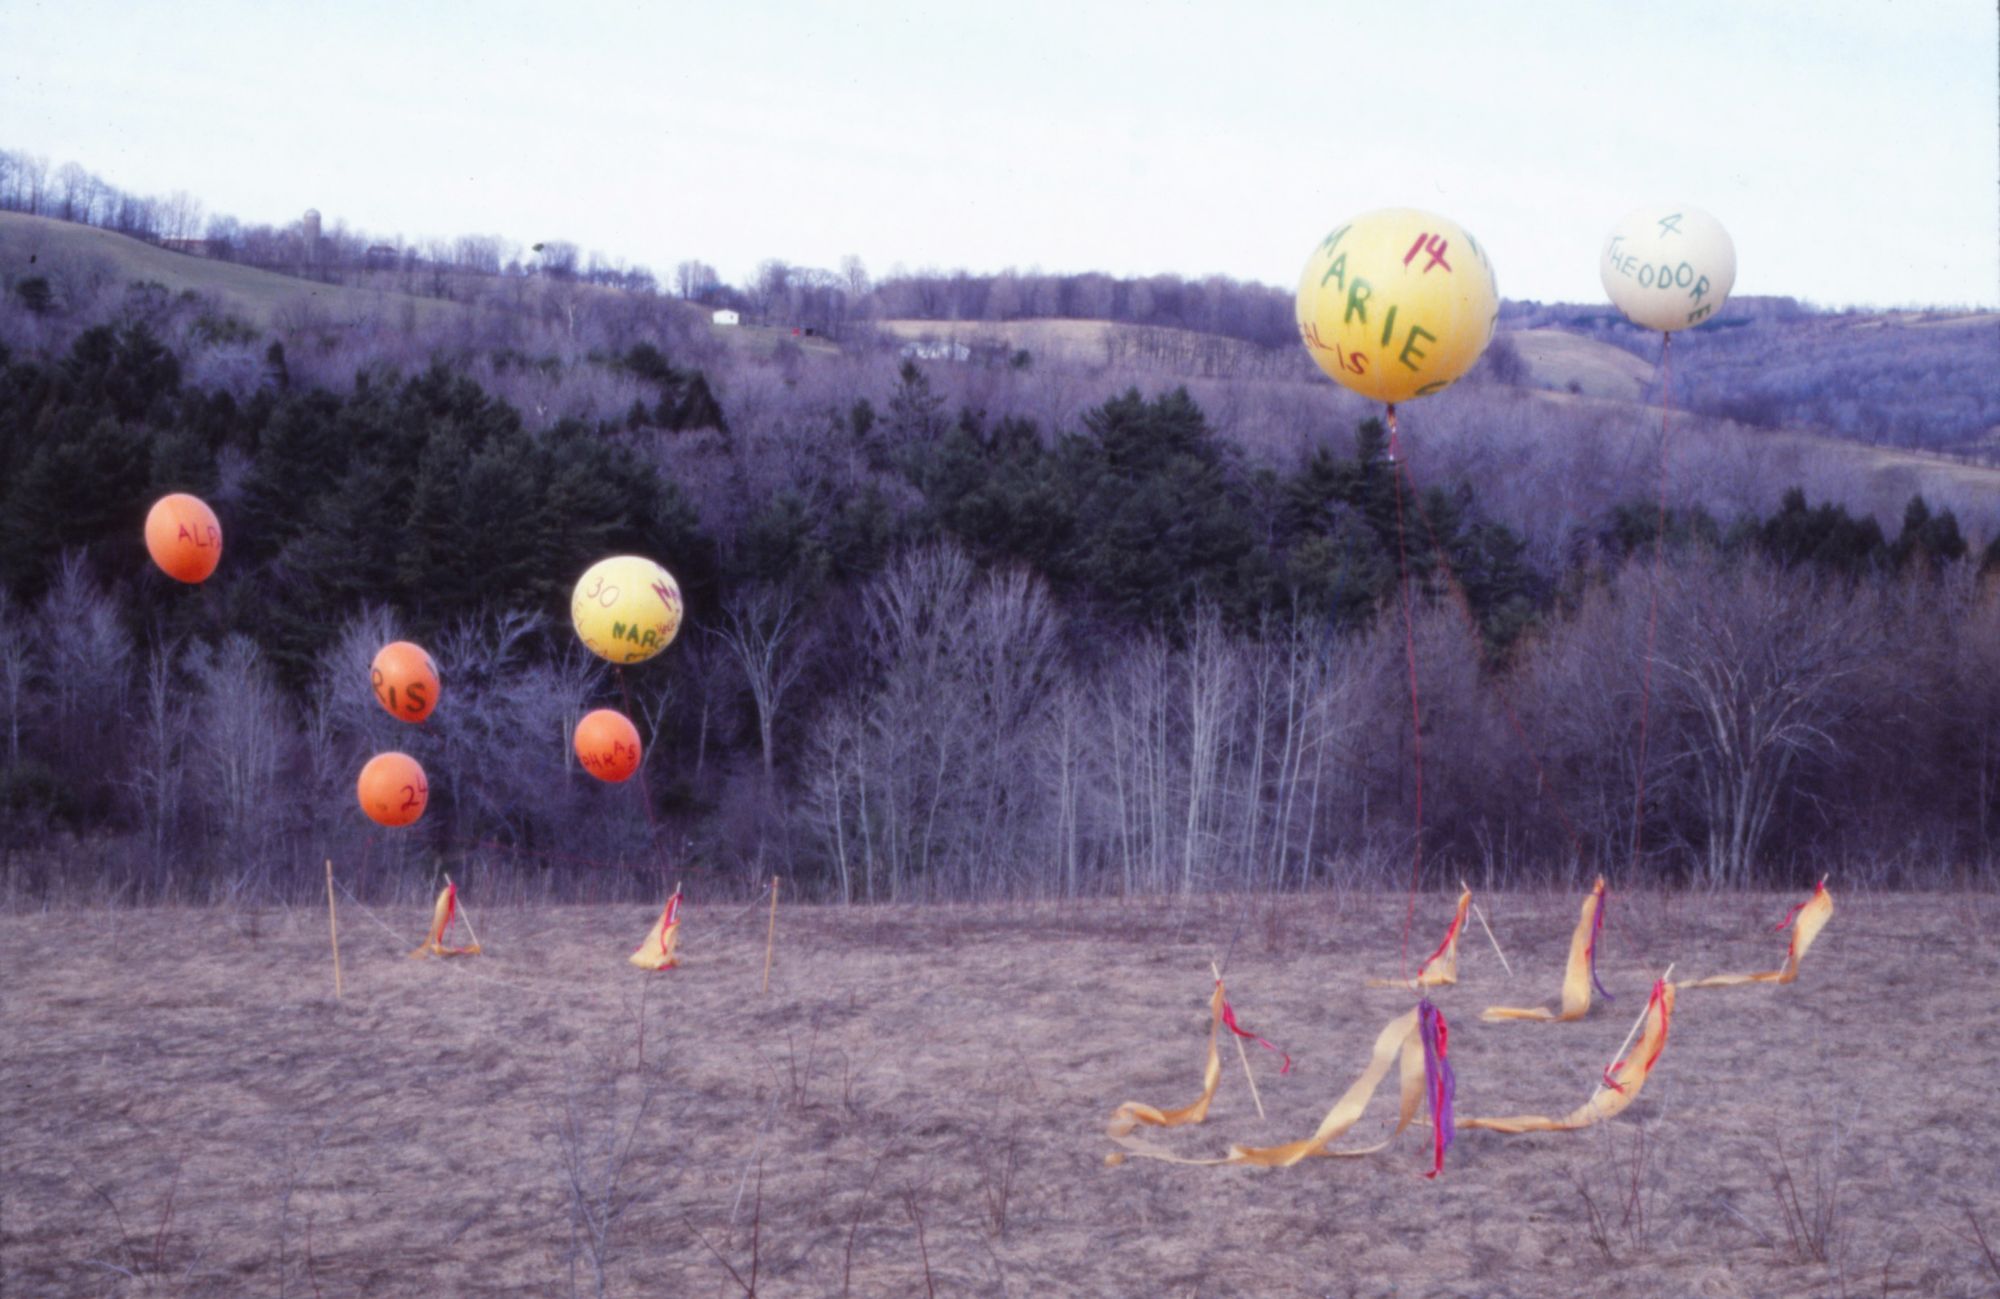 Balloons with written text hover above a cold spring mountainside where the grass has not yet grown back.